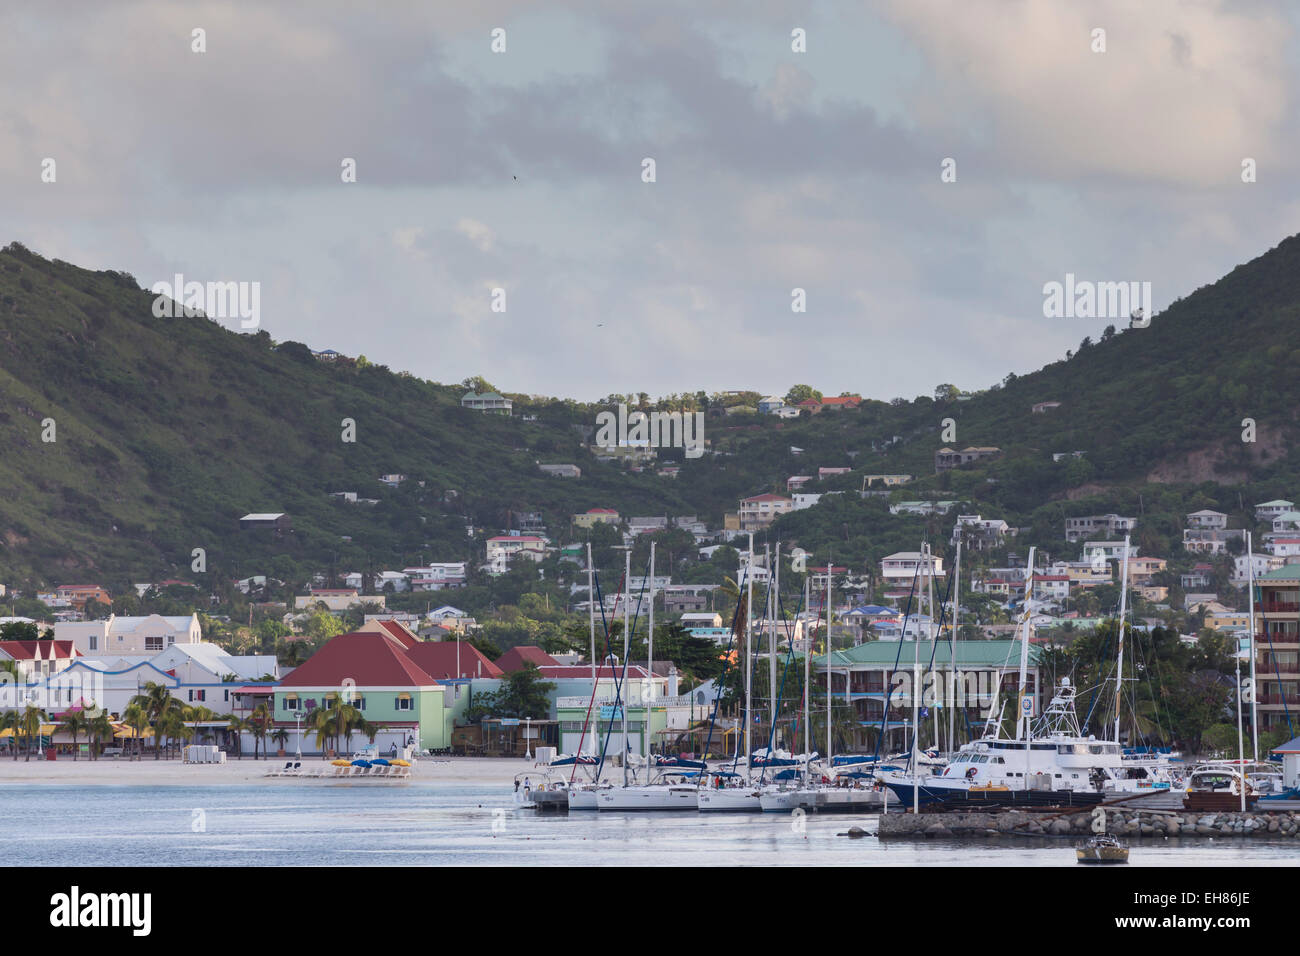 Marina and waterfront at dawn, Philipsburg, St. Maarten (St. Martin), West Indies, Caribbean, Central America Stock Photo